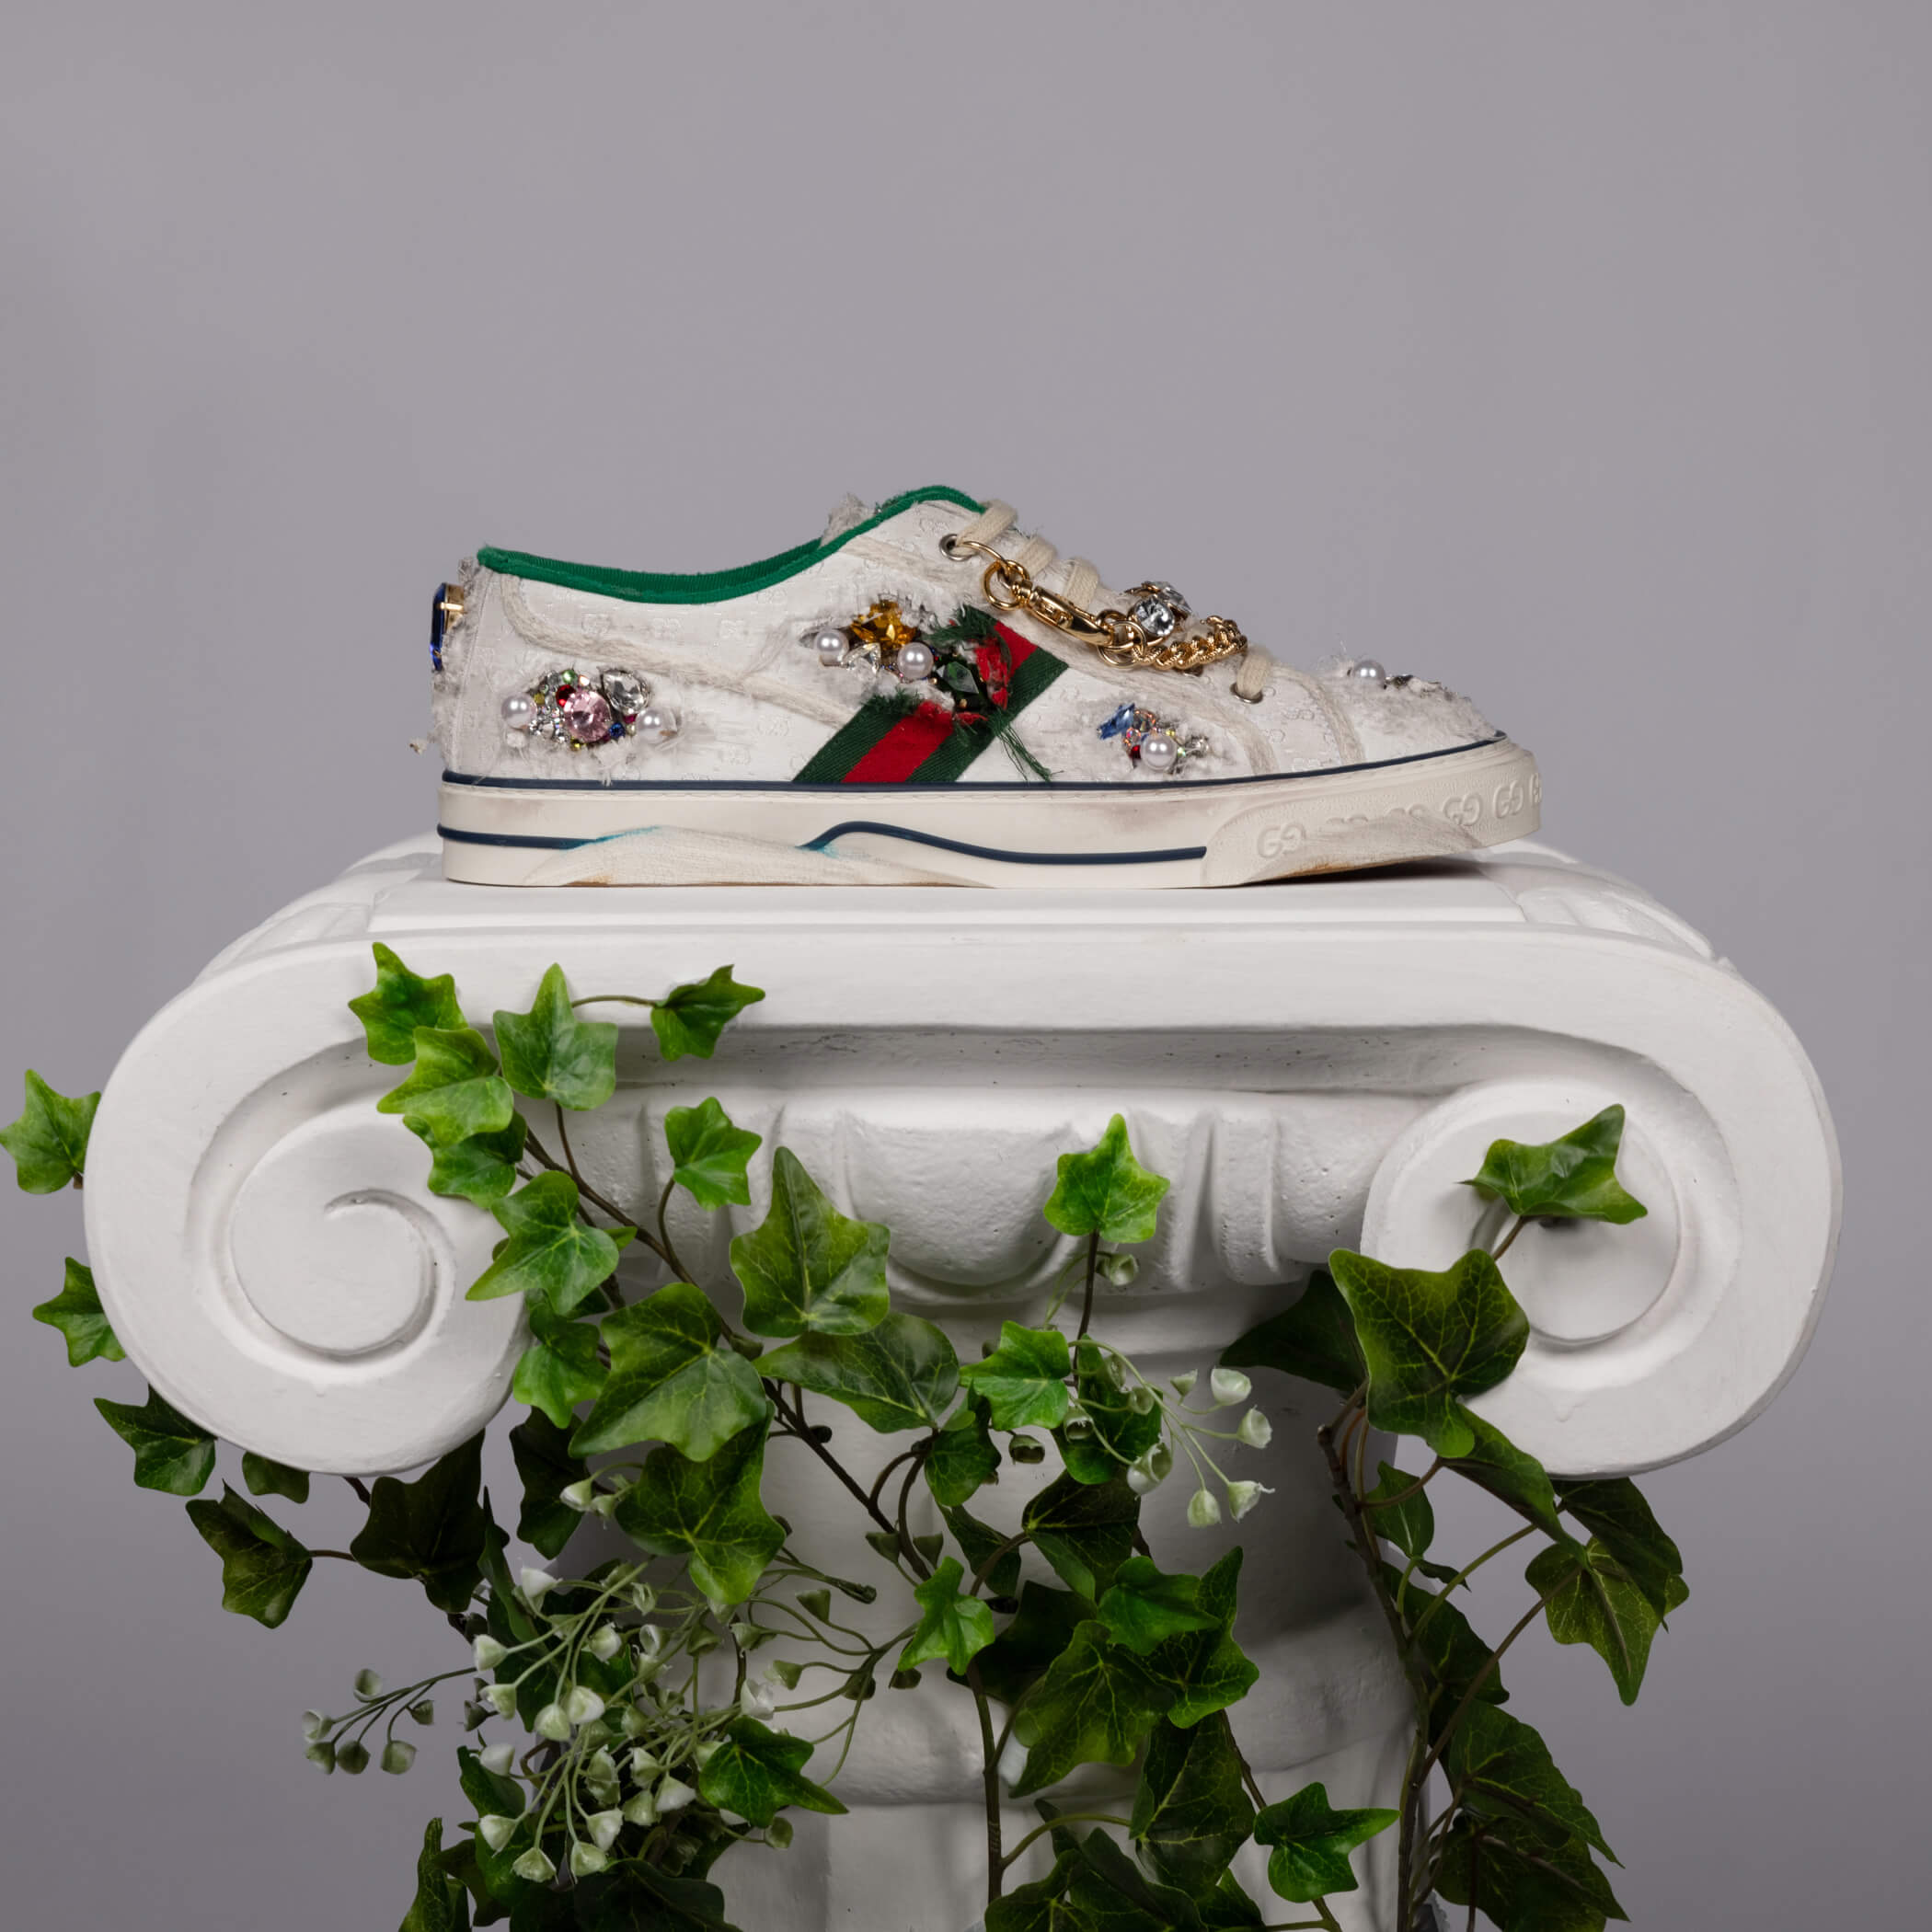 STILL_LIFE_ART4.jpg image from GUCCI SNEAKER GARAGE RAL7000STUDIO project created on 2020-03-01